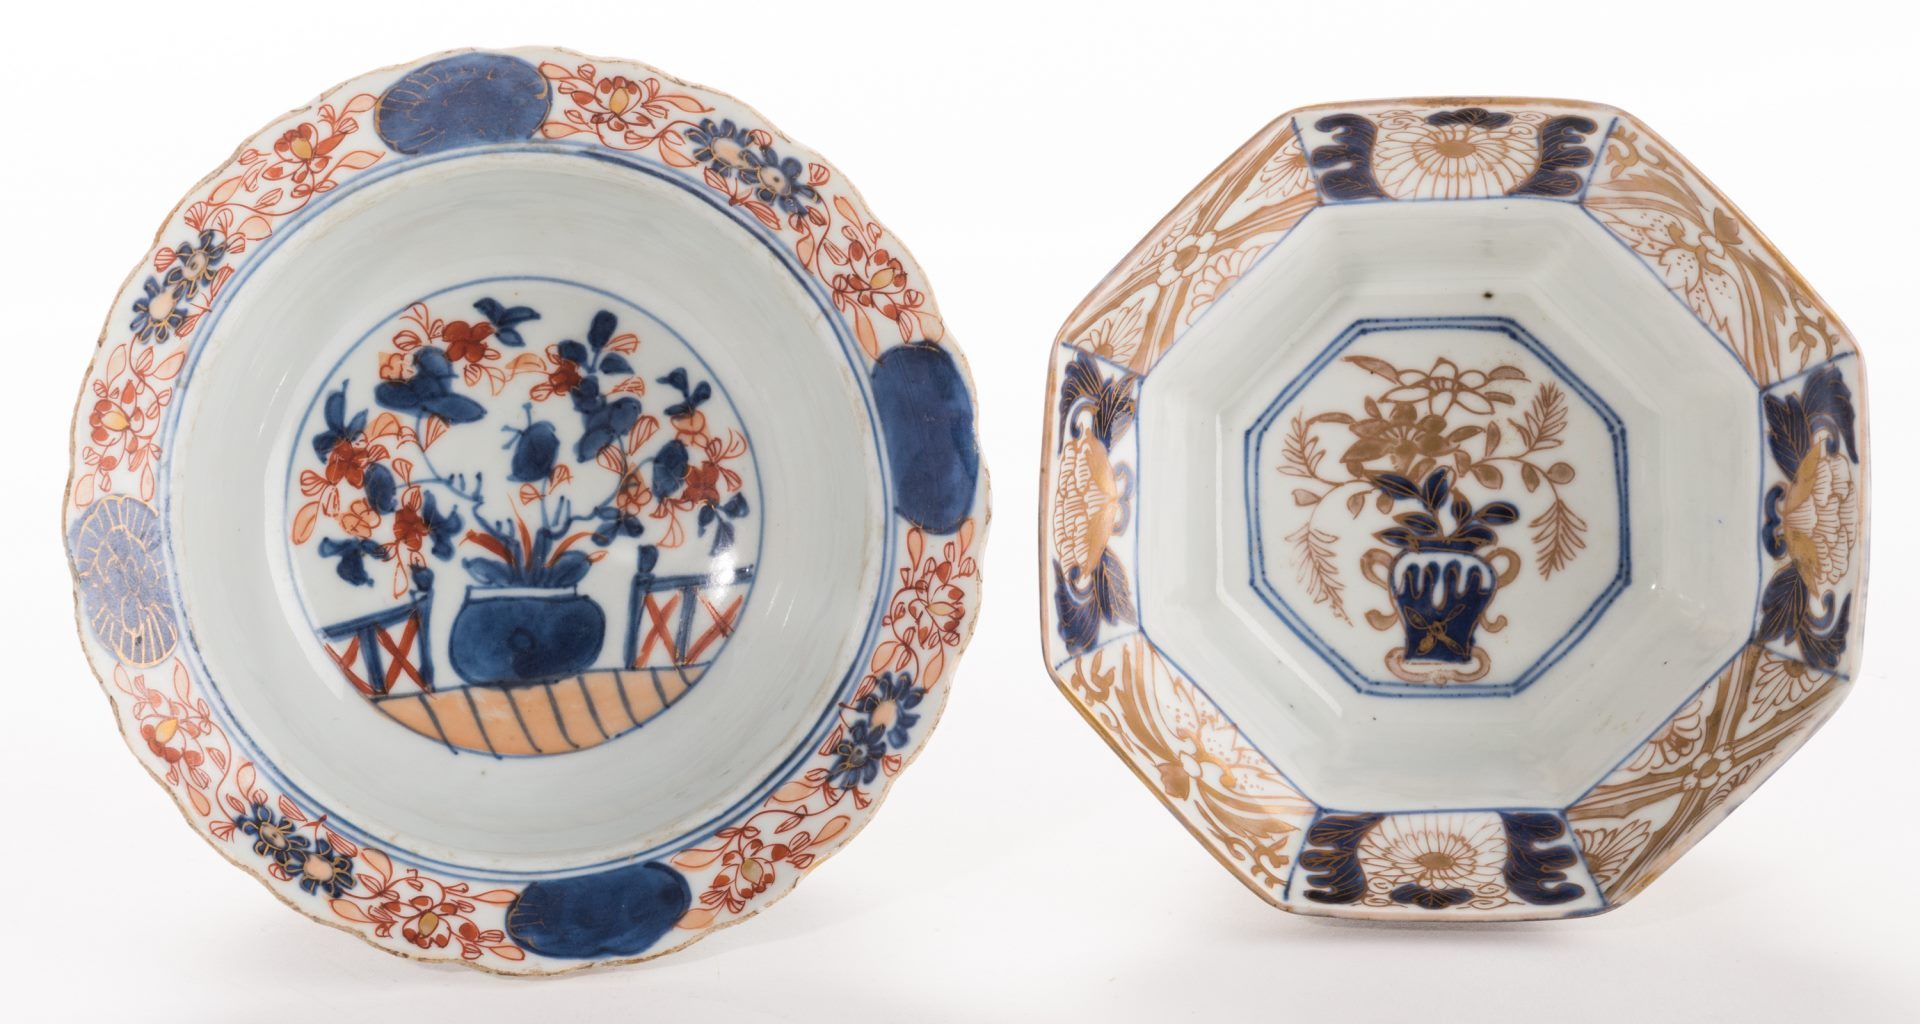 Lot 183: Two Small Asian Porcelain Bowls, 18th c.